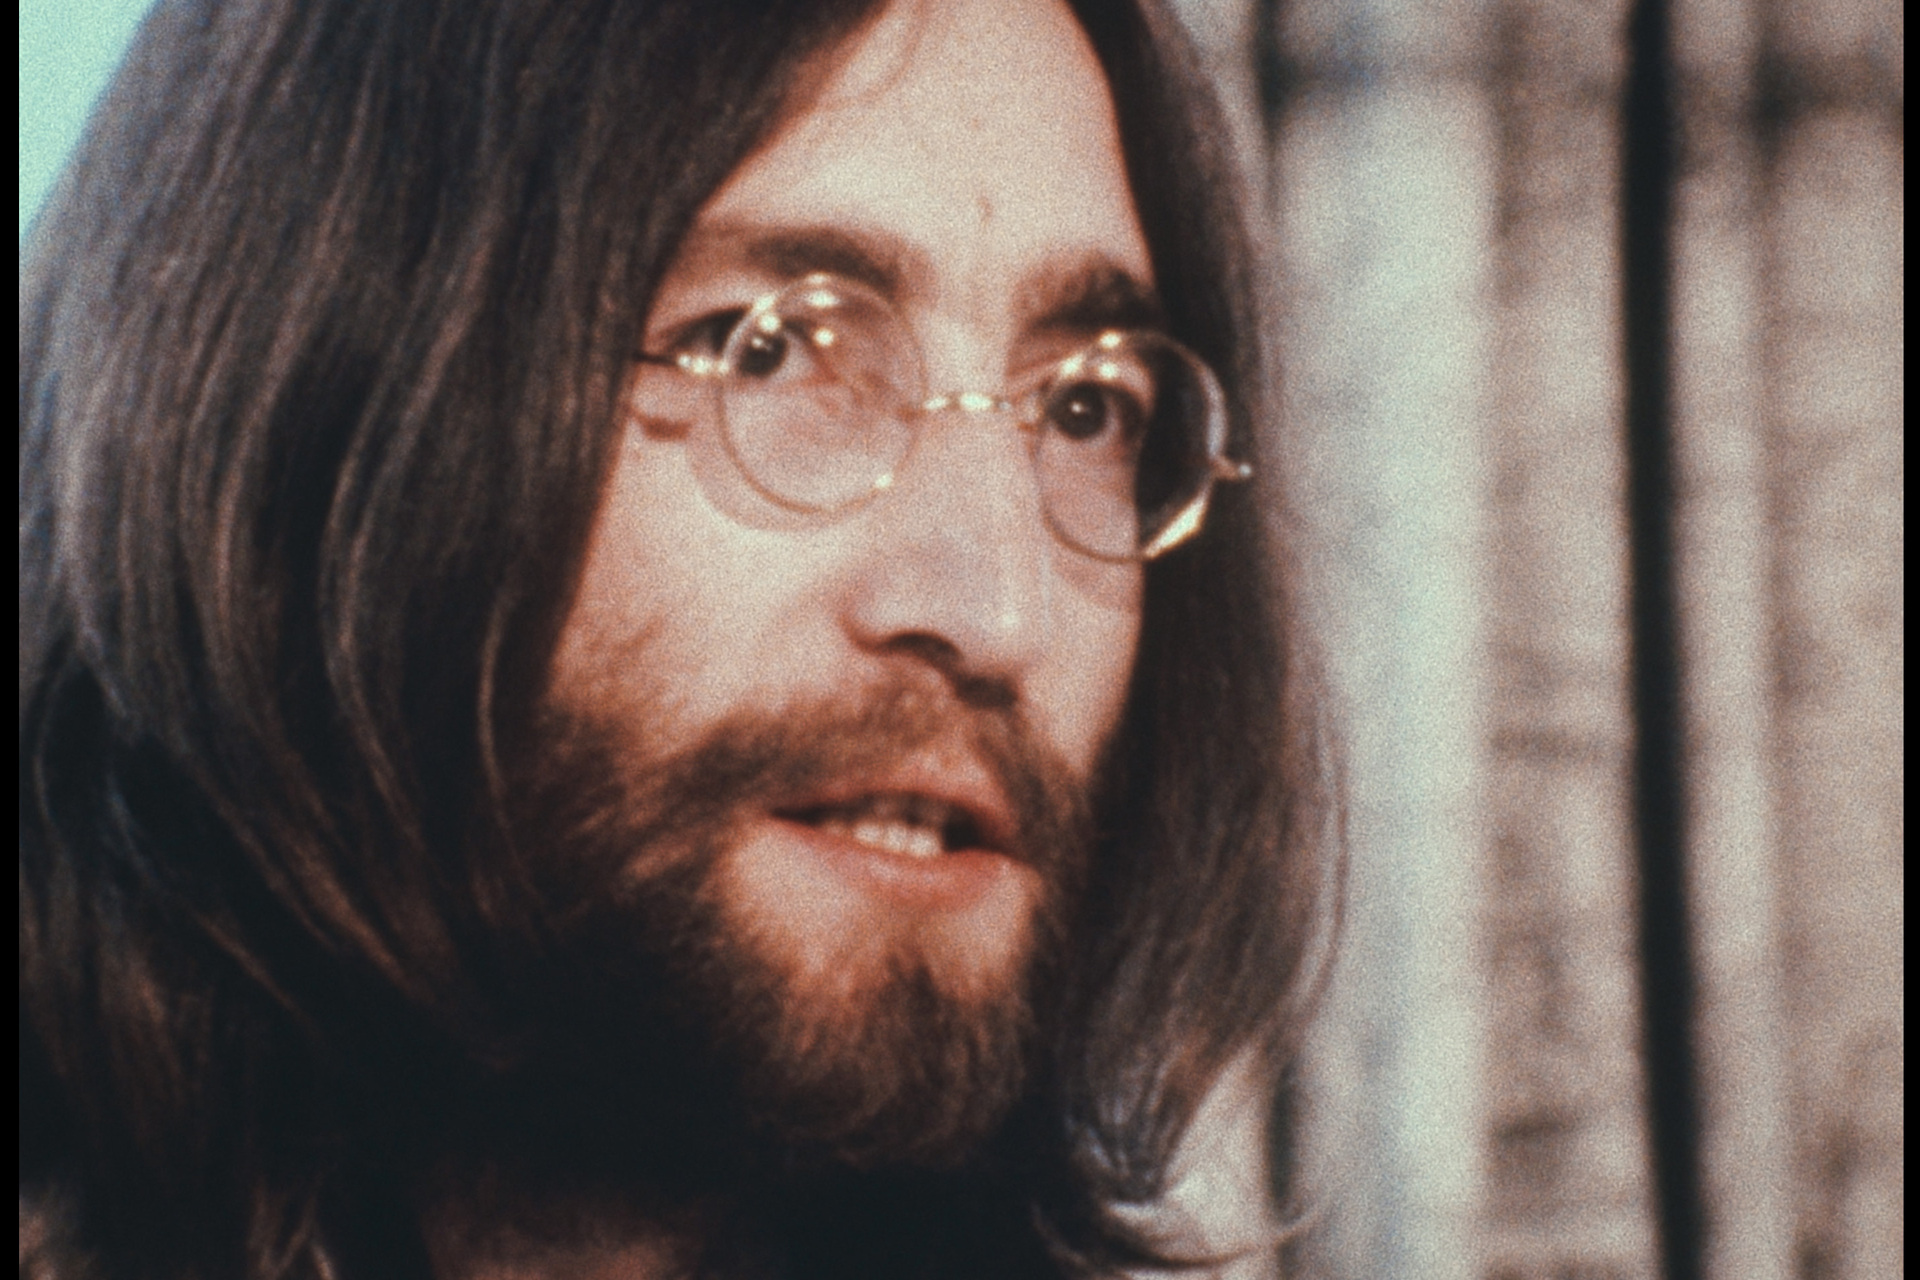 A New John Lennon Documentary Comes Out Today